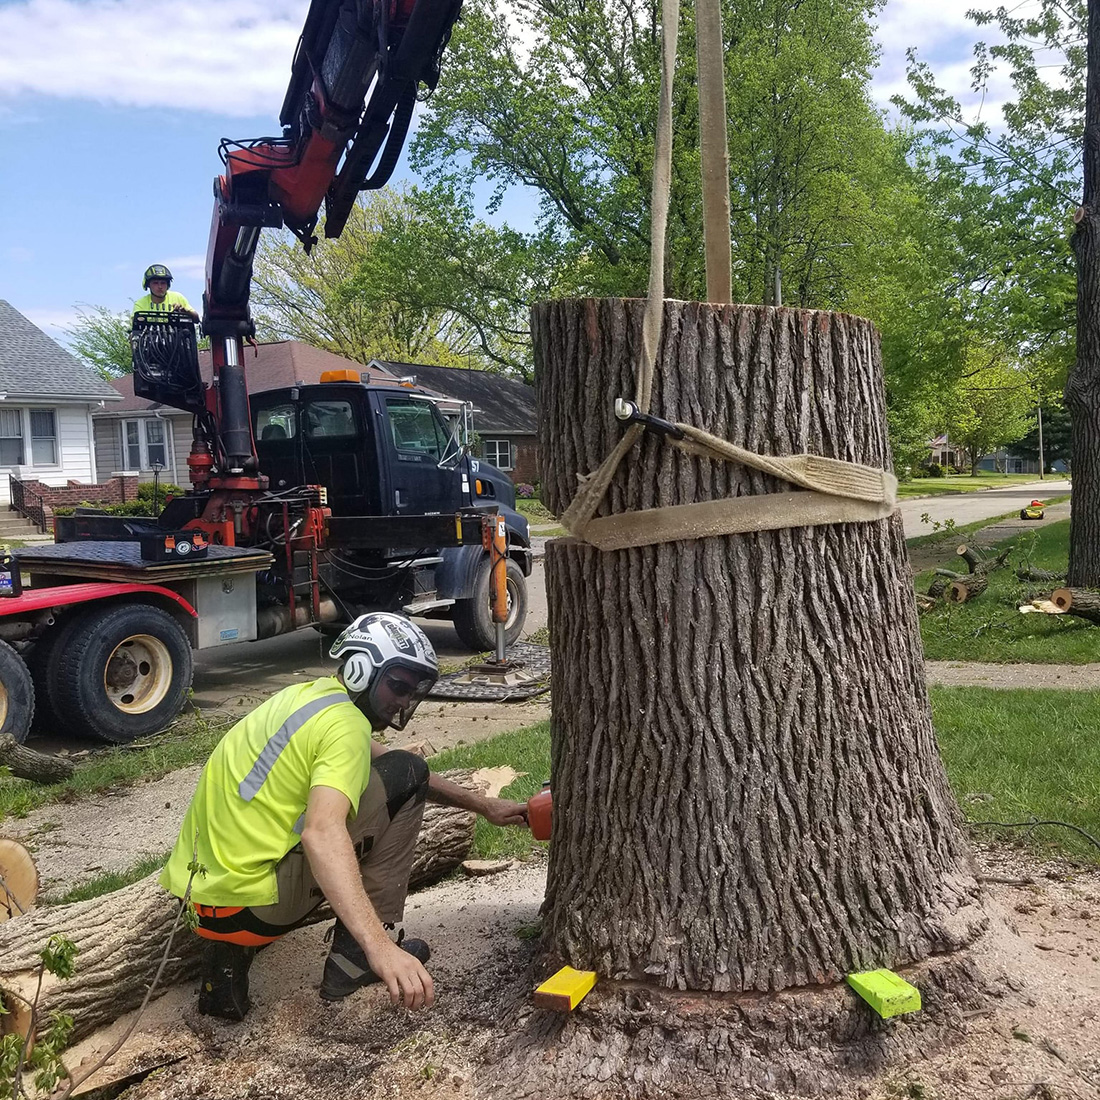 Stump removal with aid of crane services - final step of tree removal - Alton, IL